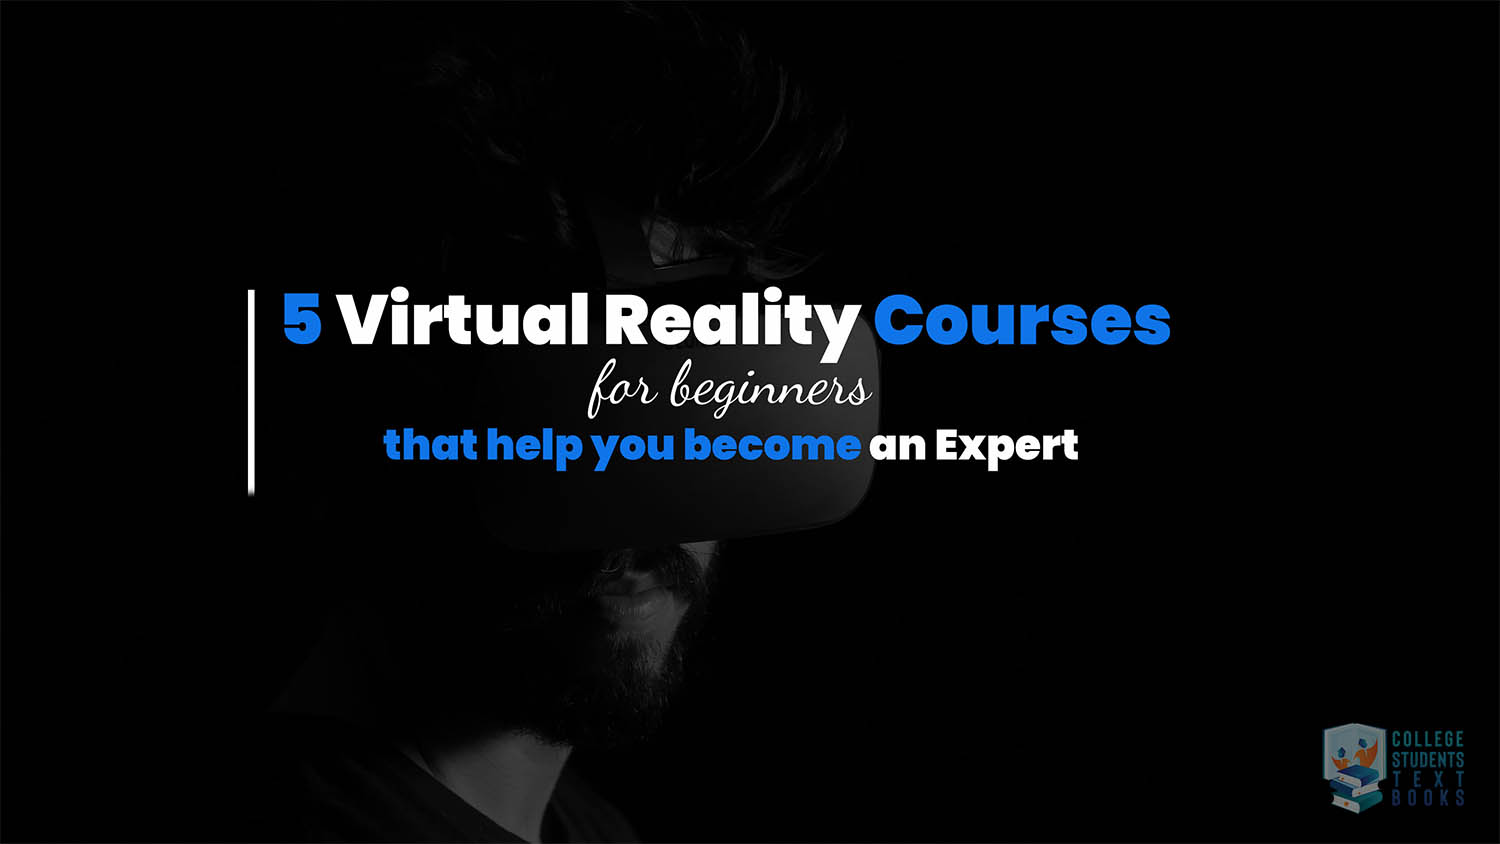 5 Virtual Reality Courses For Beginners That Help You Become An Expert